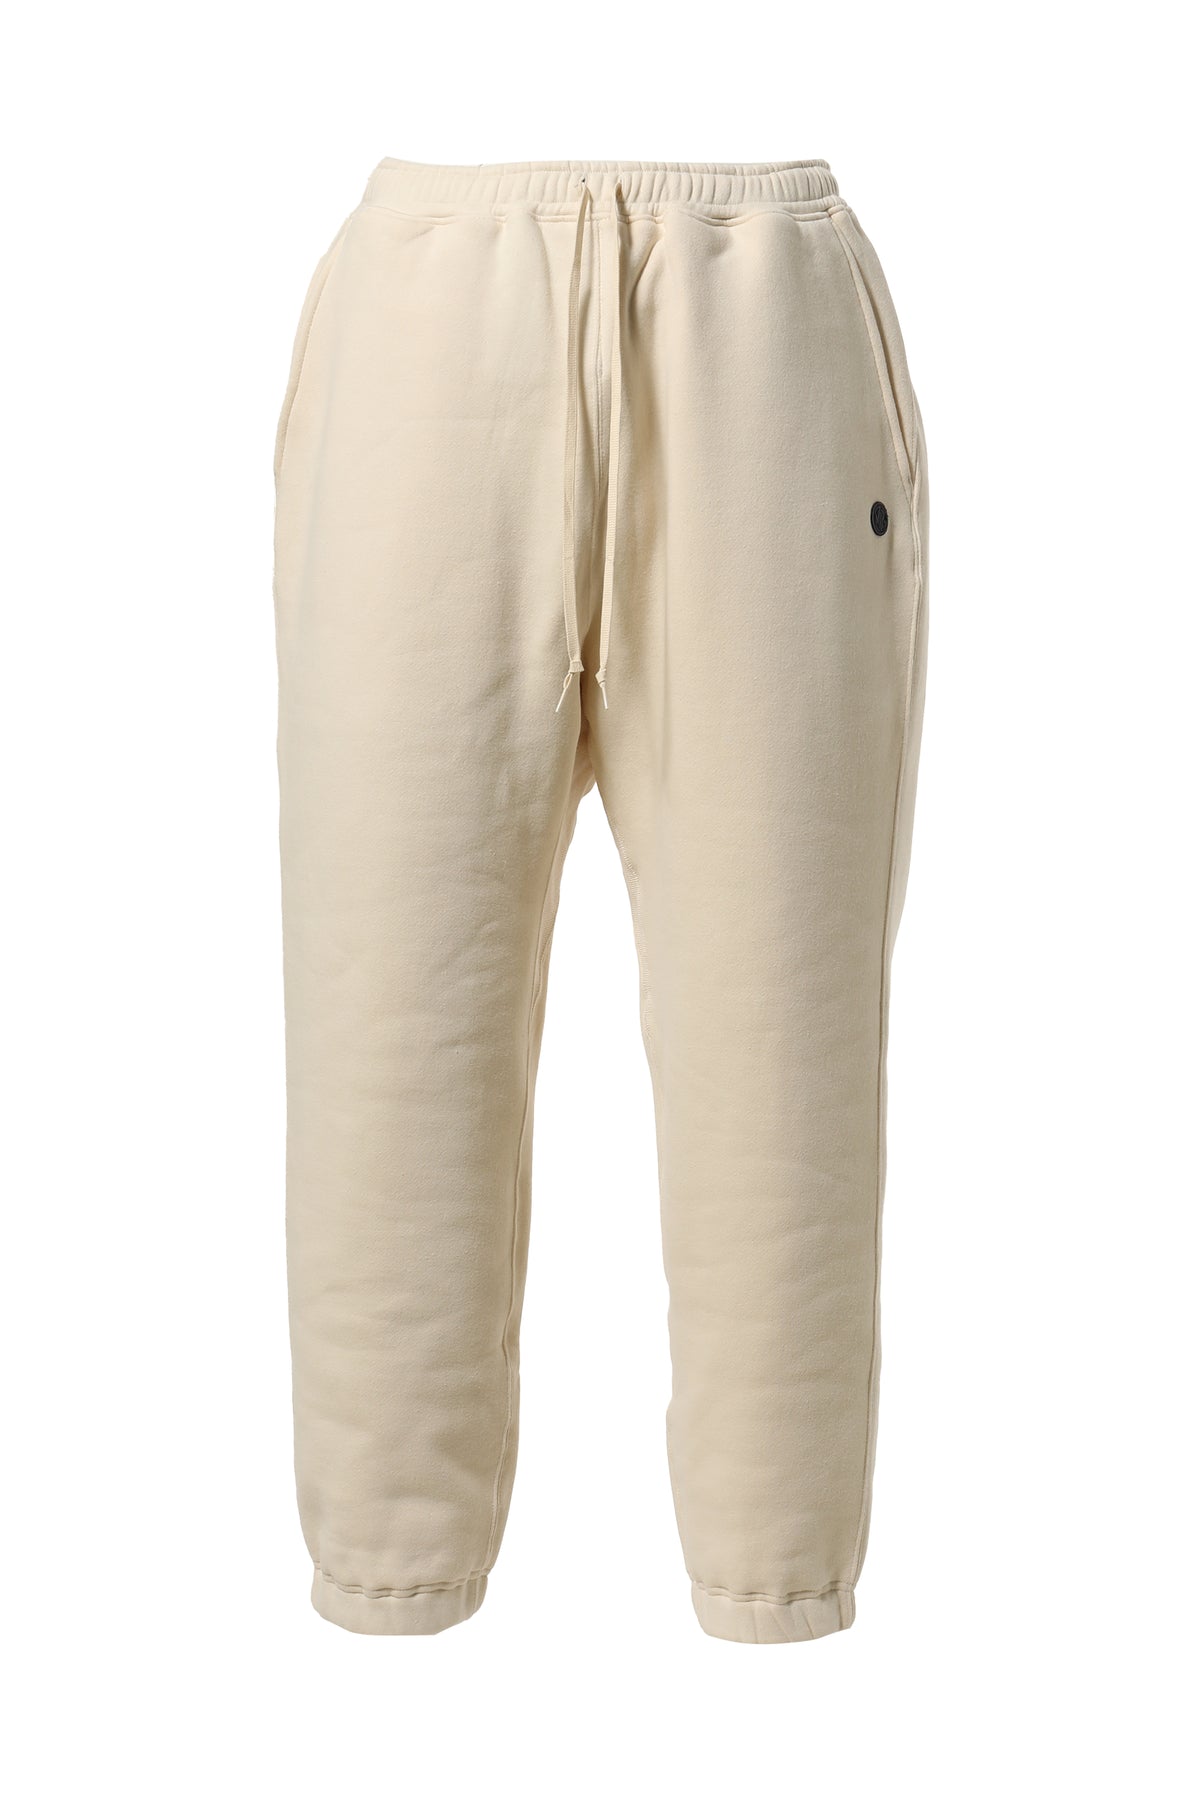 MOUT RECON TAILOR CONFIDENTIAL FRENCH TERRY JOGGERS / TAN